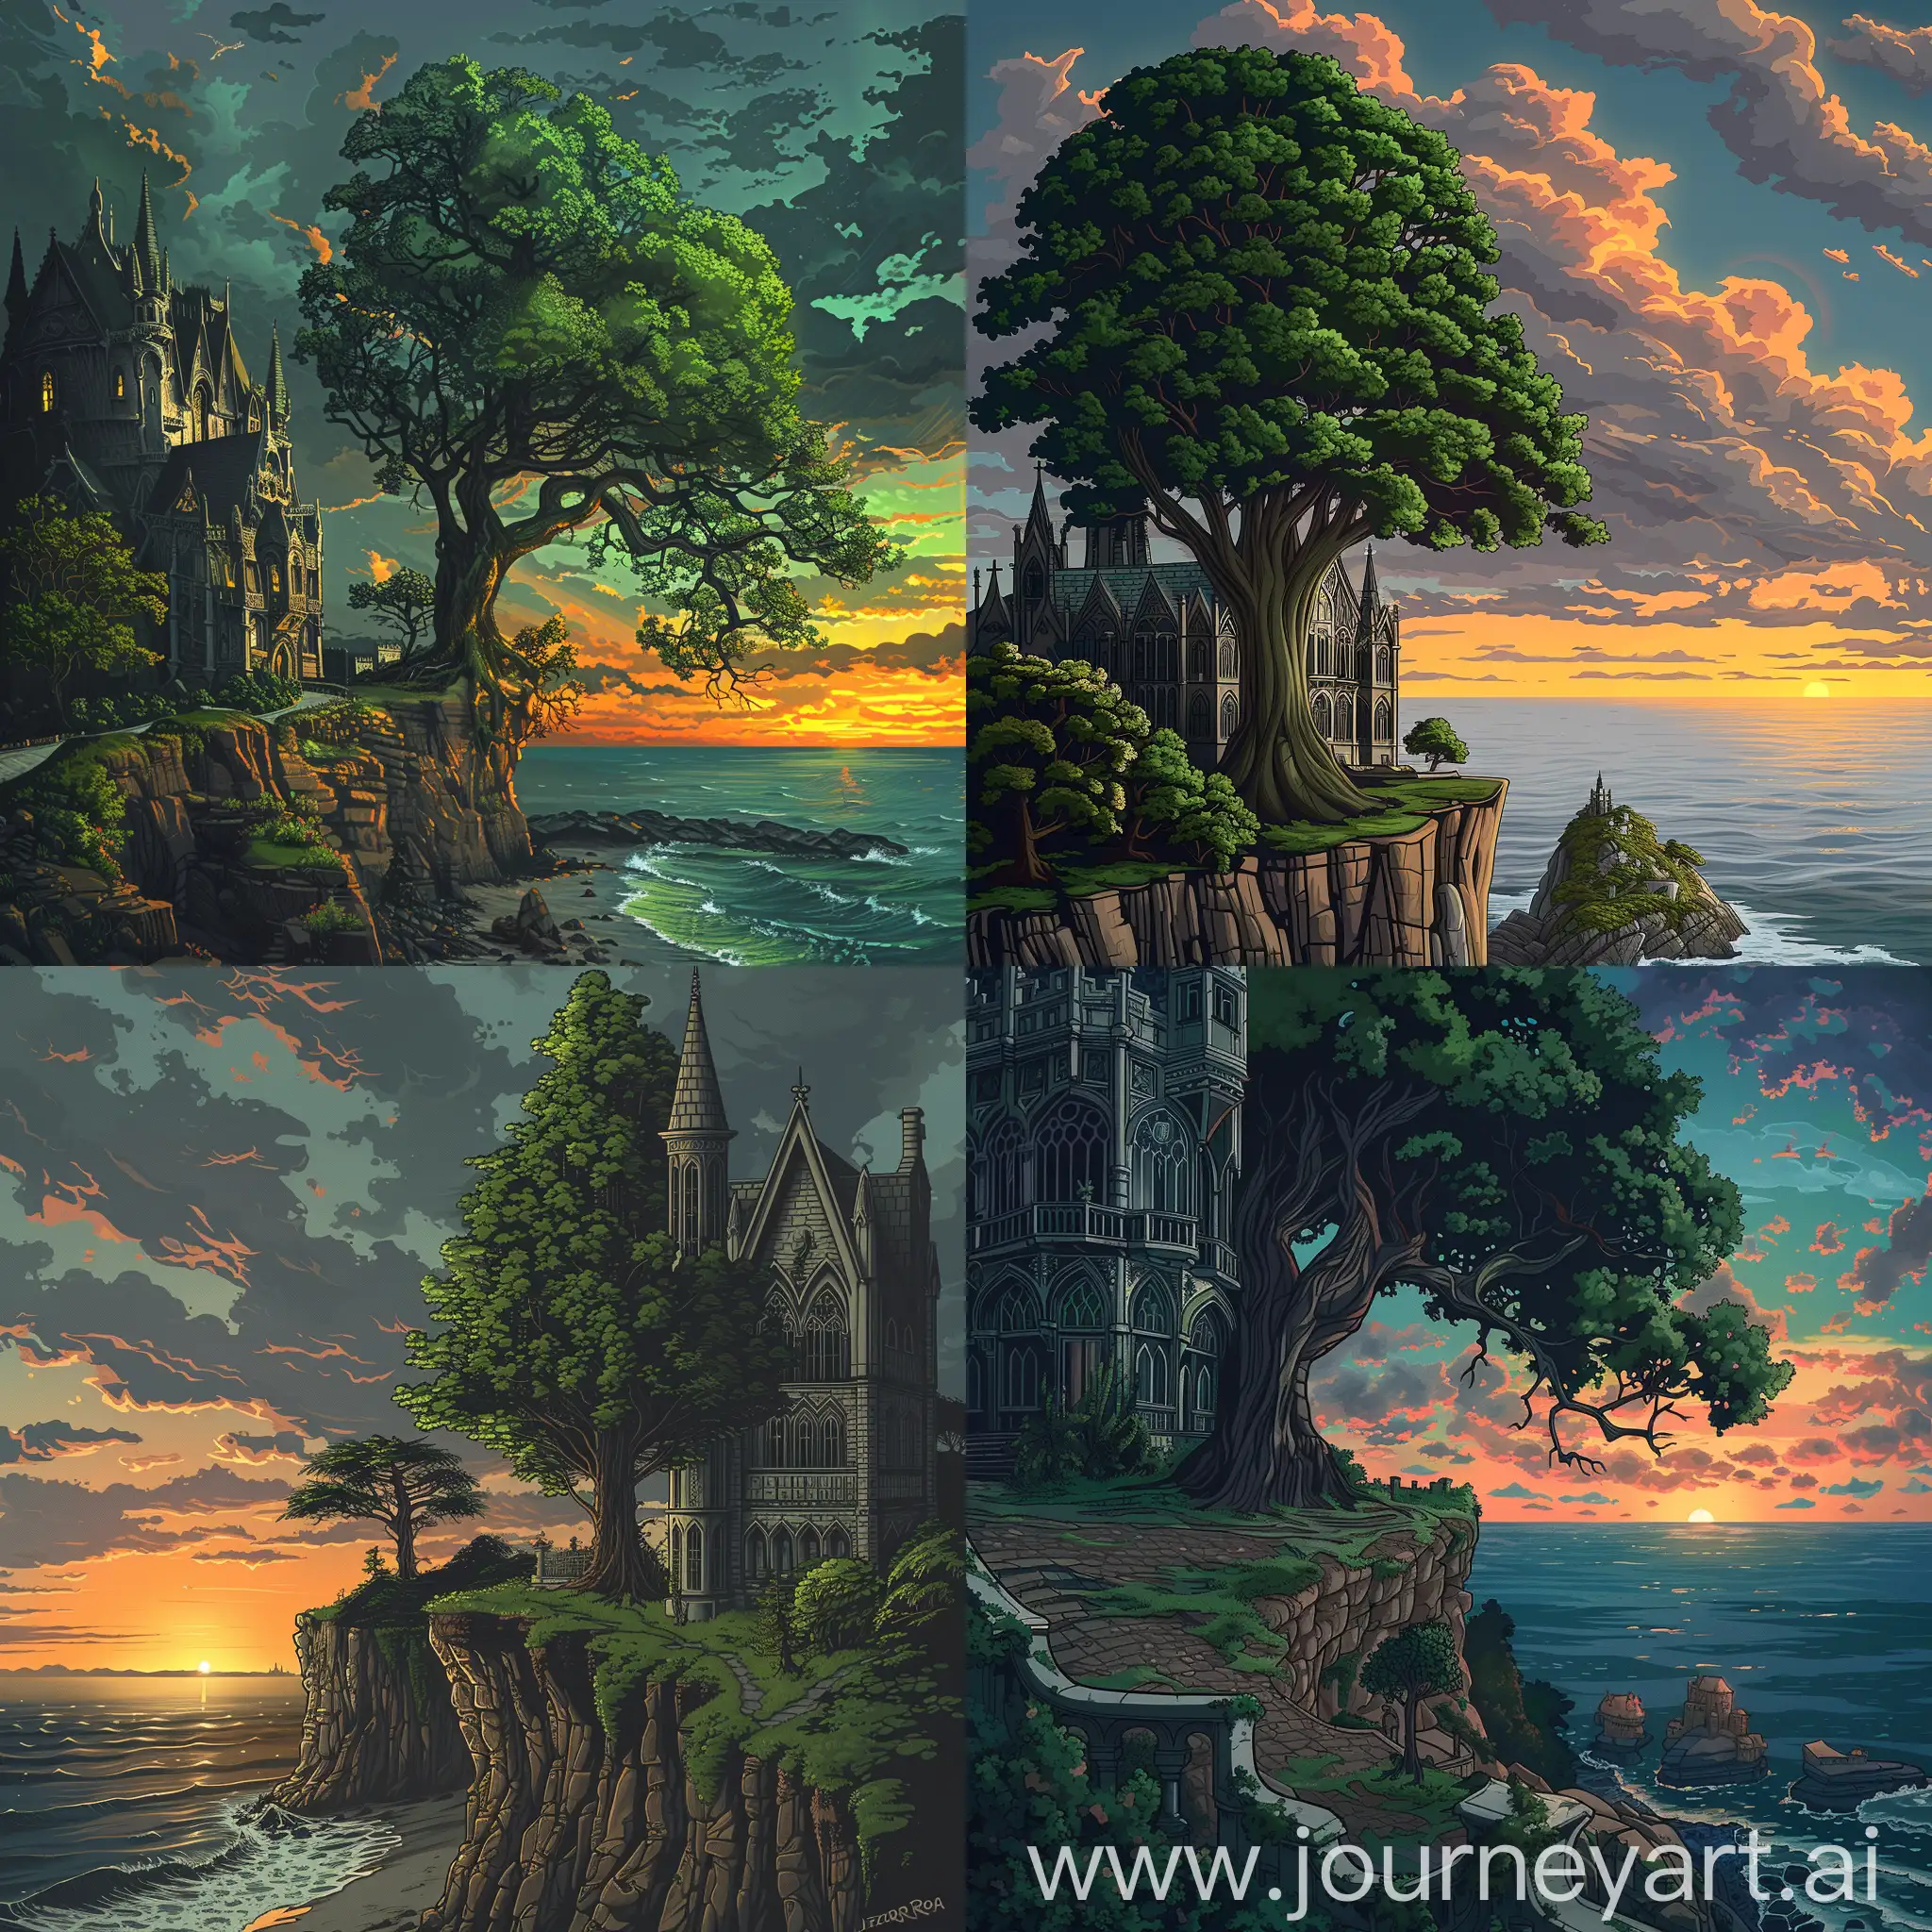 Illustration of a landscape near sea, cliff, big green tree next to gothic mansion, sunset, art, illustration by Jorge Roa